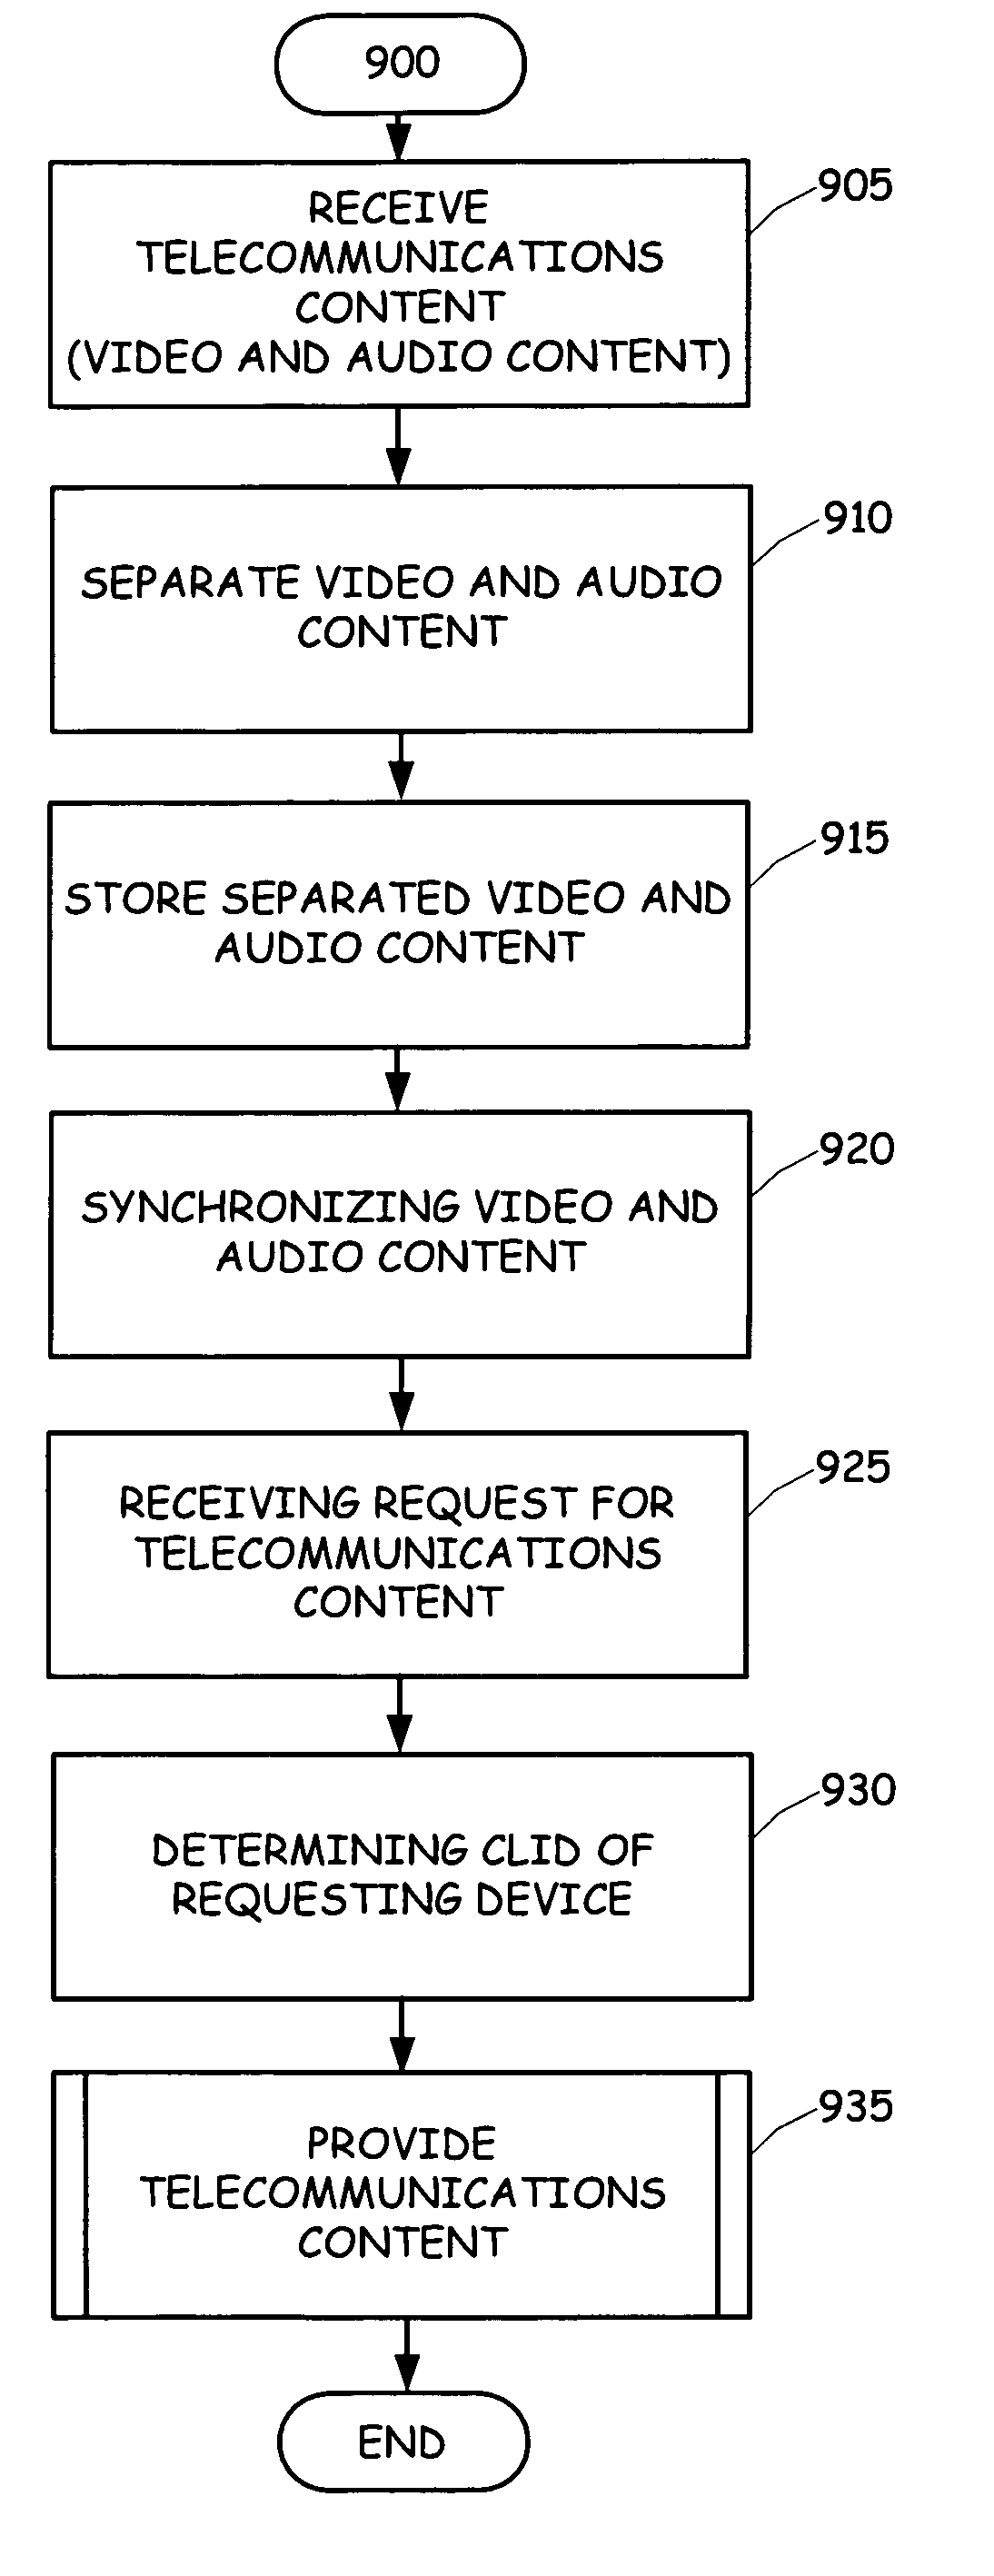 Provision of messaging services from a video messaging system based on ANI and CLID